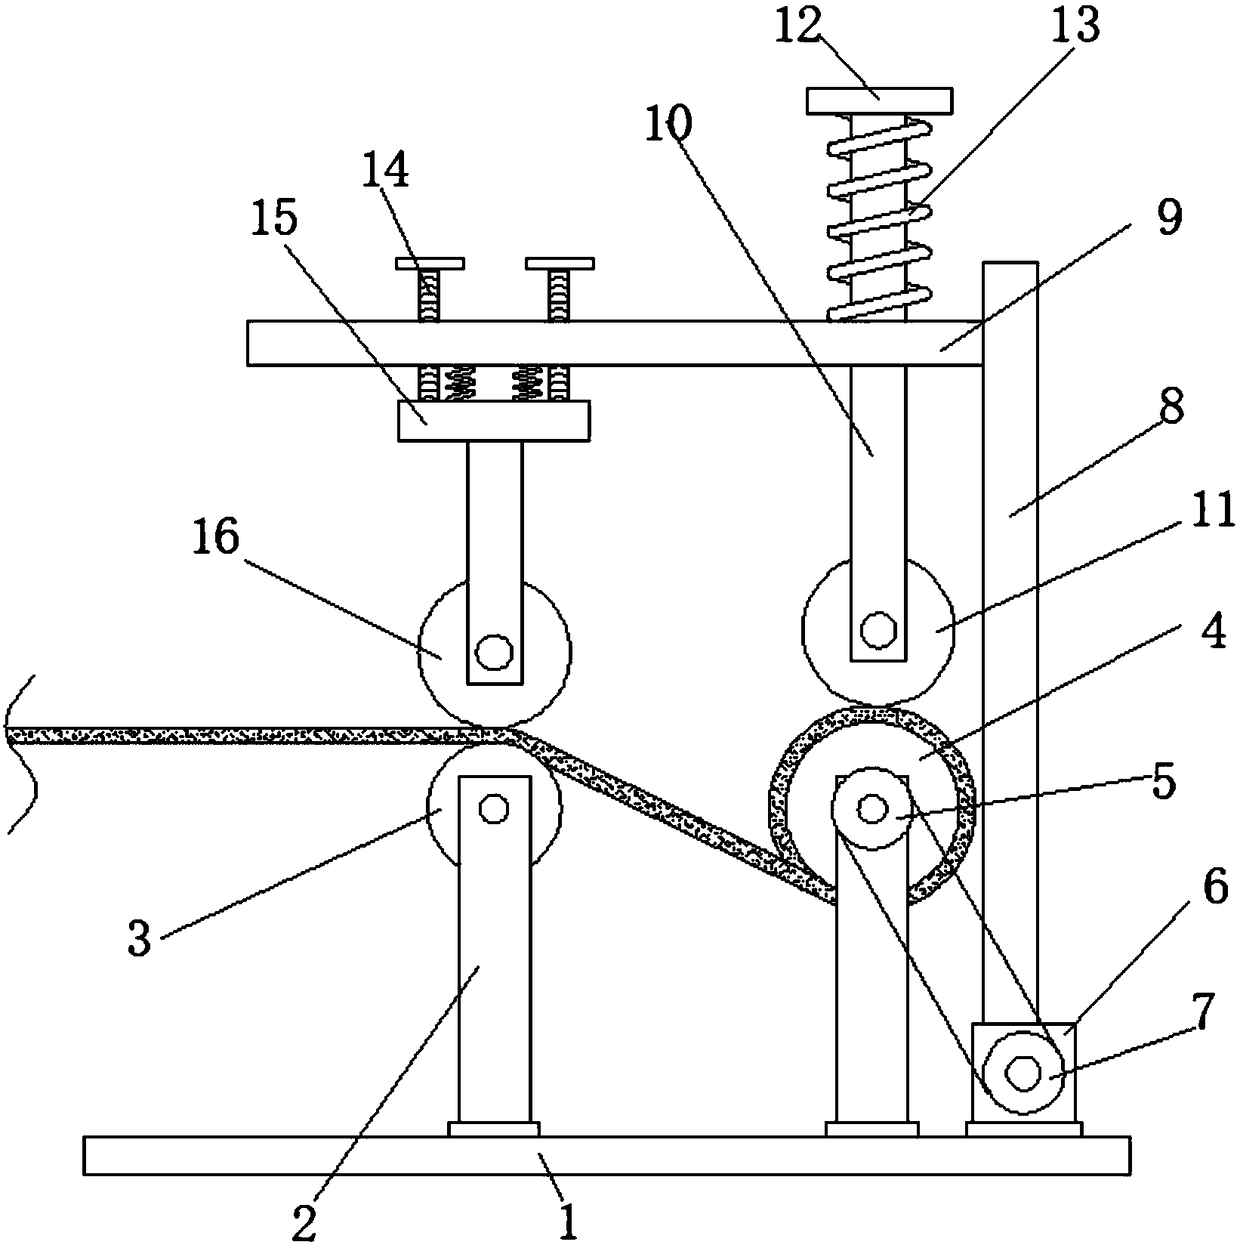 Winding device for fabric processing